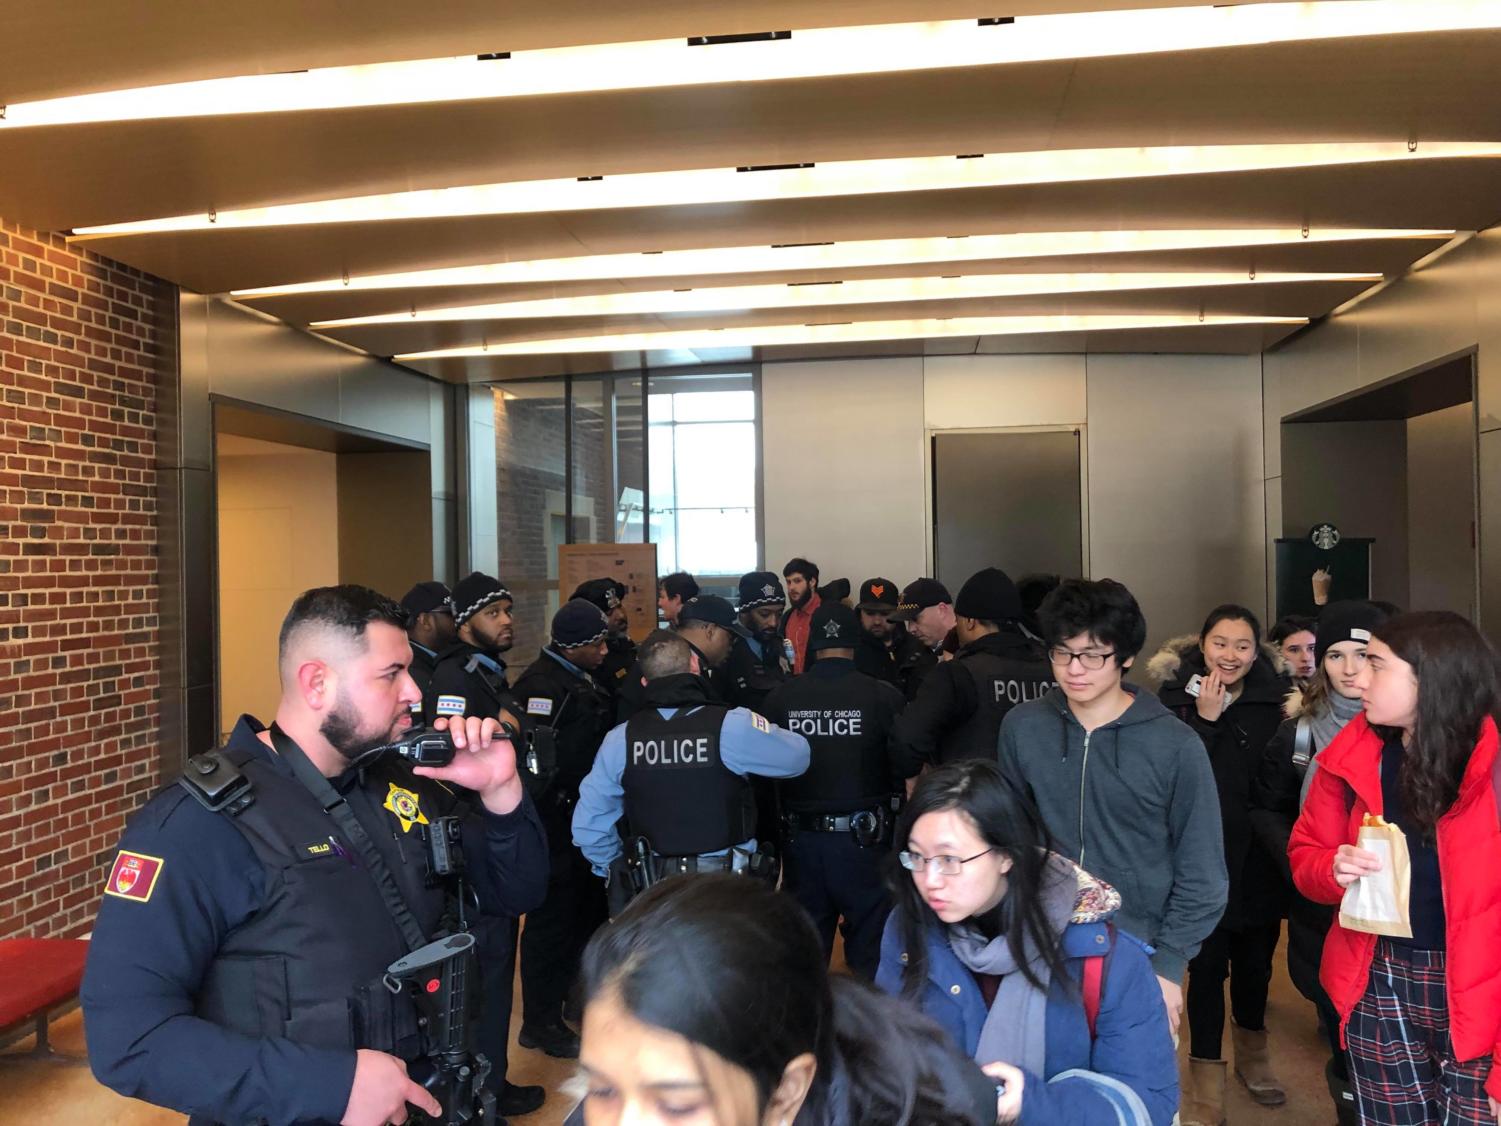 Police evacuated students from the Saieh Hall of Economics at around 12:30 p.m.